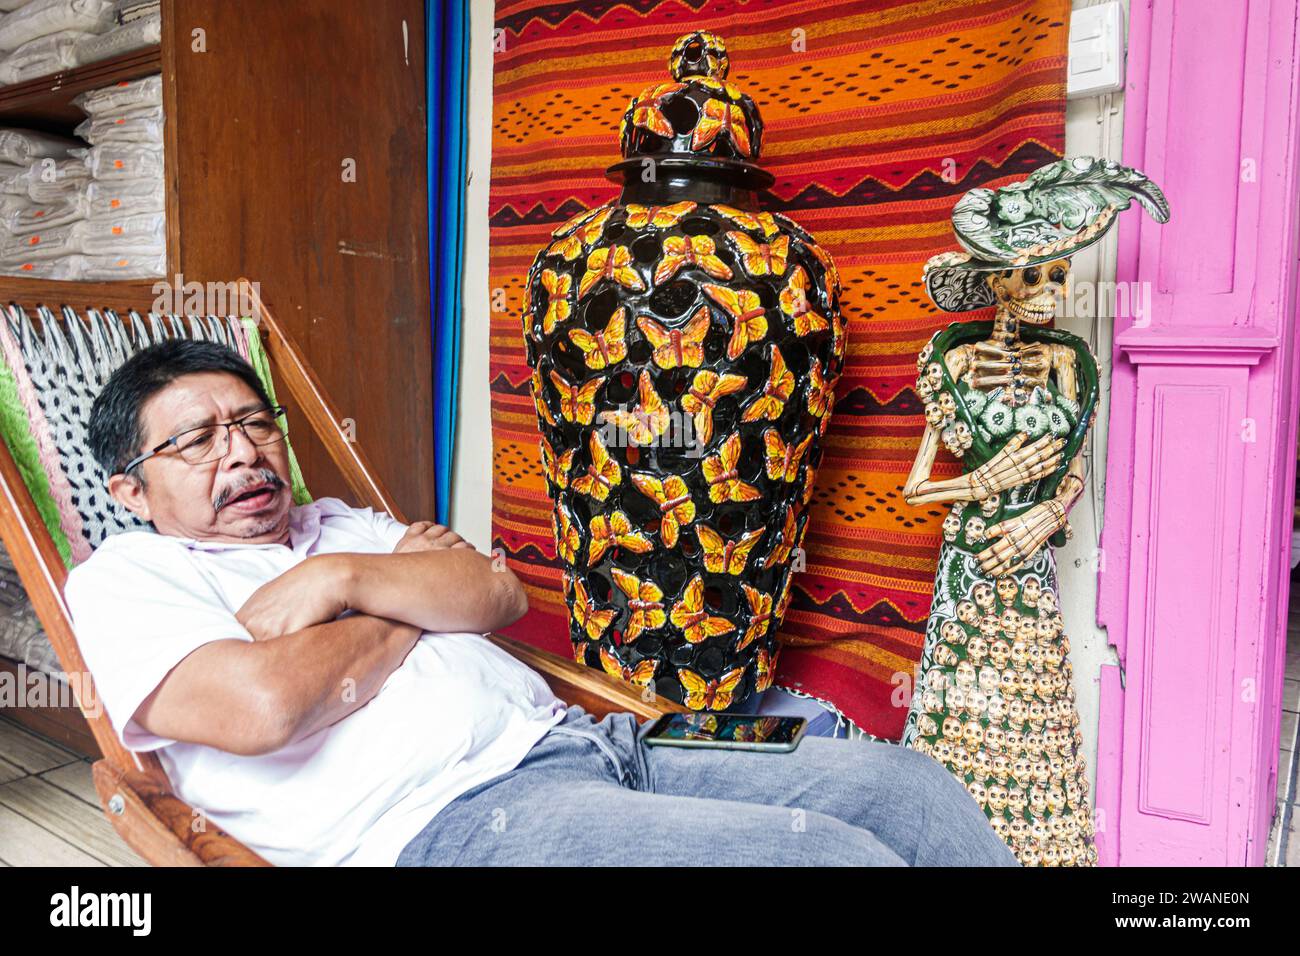 Merida Mexico,centro historico central historic district,resting relaxing chair,La Catrina Day of Dead skeleton,large vase,art collective gallery Maya Stock Photo